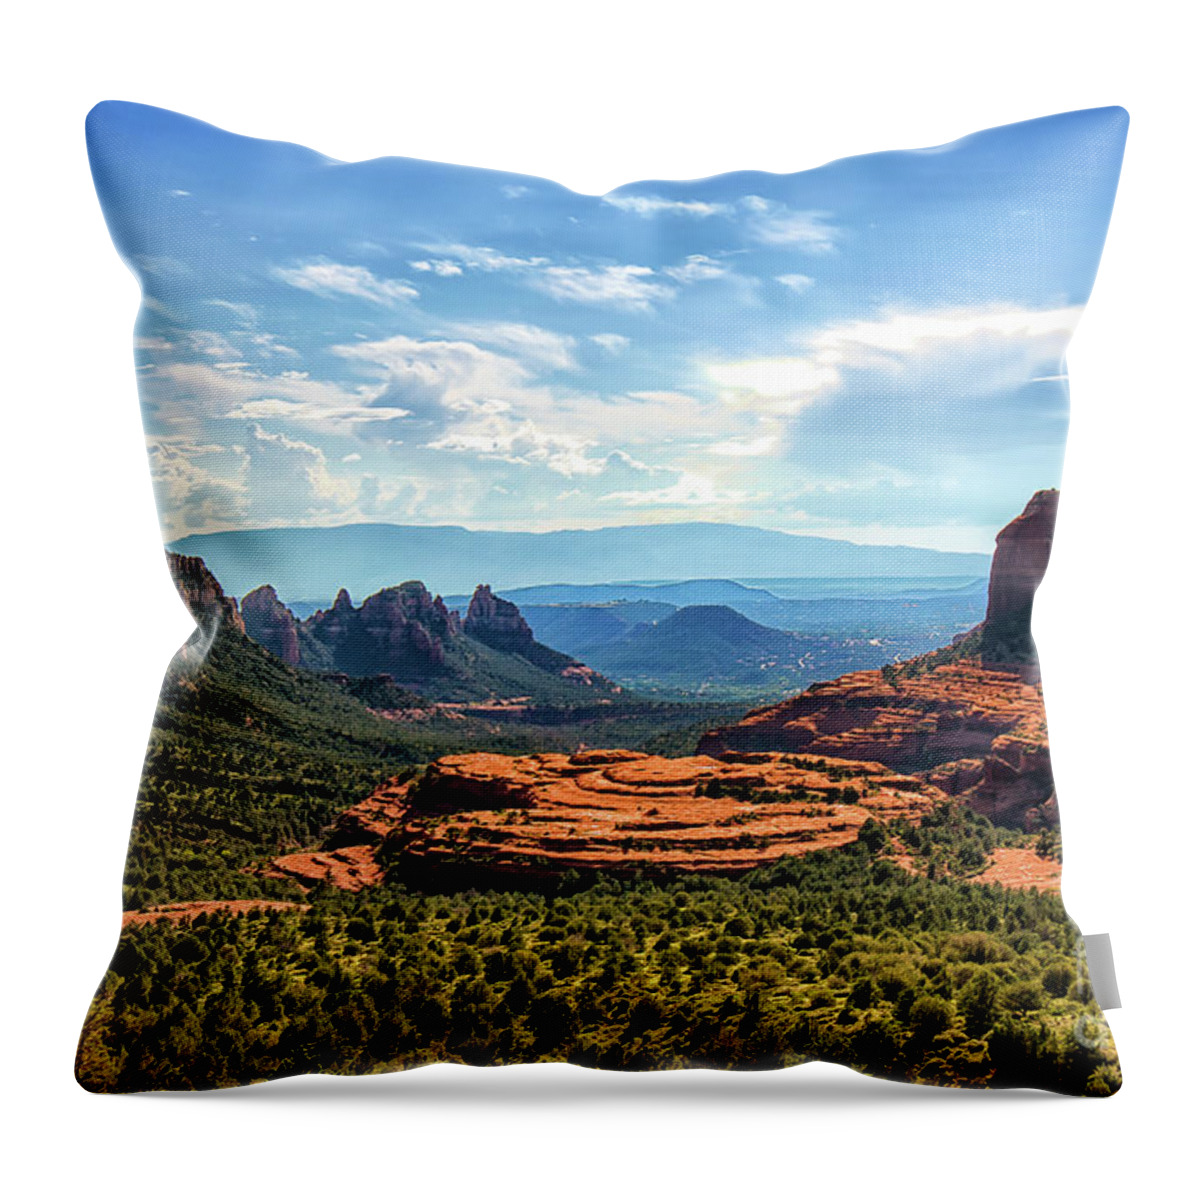 Southwest Throw Pillow featuring the photograph Merry Go Round Arch, Sedona, Arizona by Alissa Beth Photography